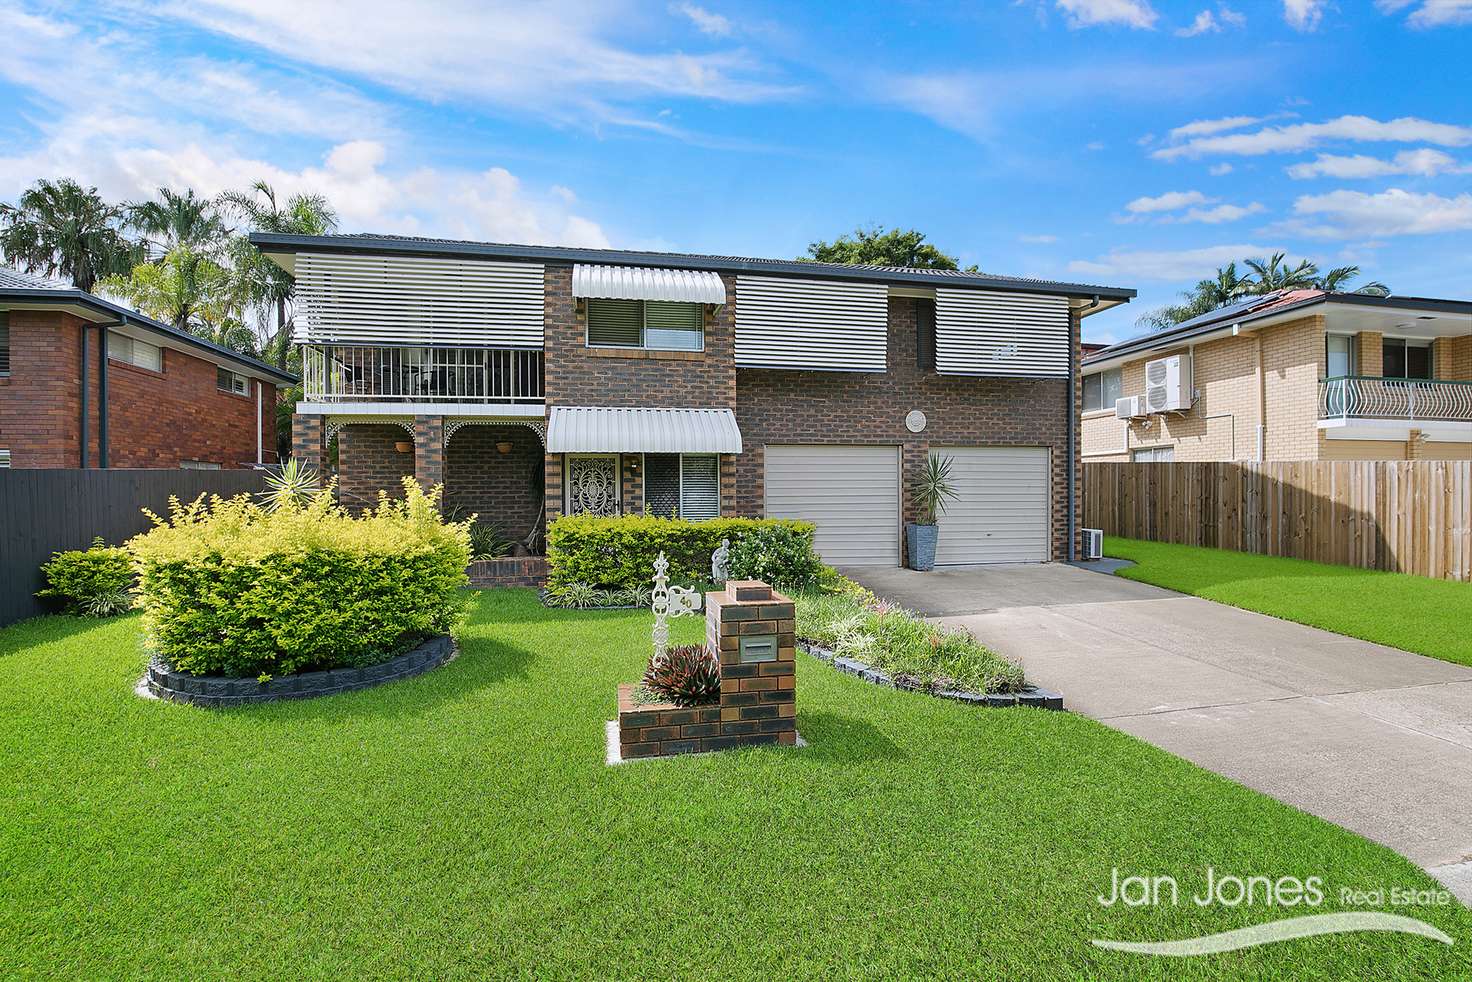 Main view of Homely house listing, 40 Hoffman St, Mcdowall QLD 4053